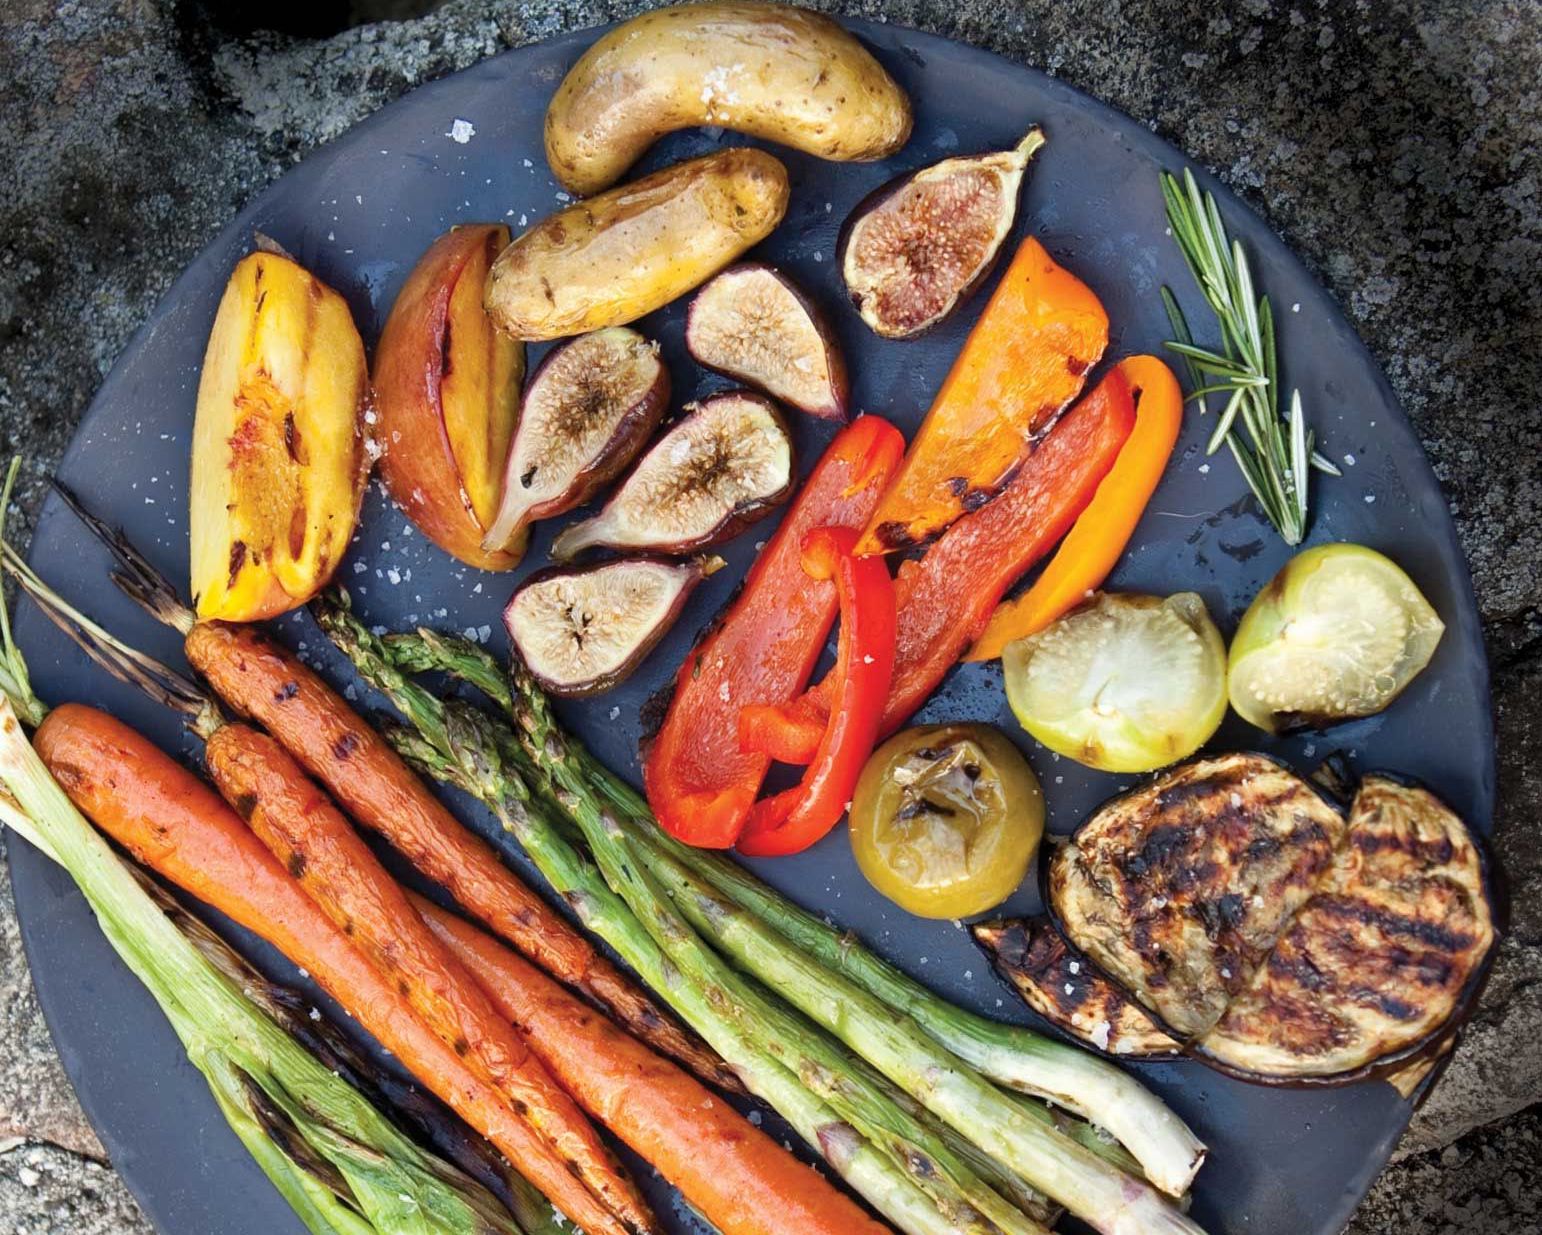 What Job Would You Have in a Restaurant Kitchen? grilled veggies